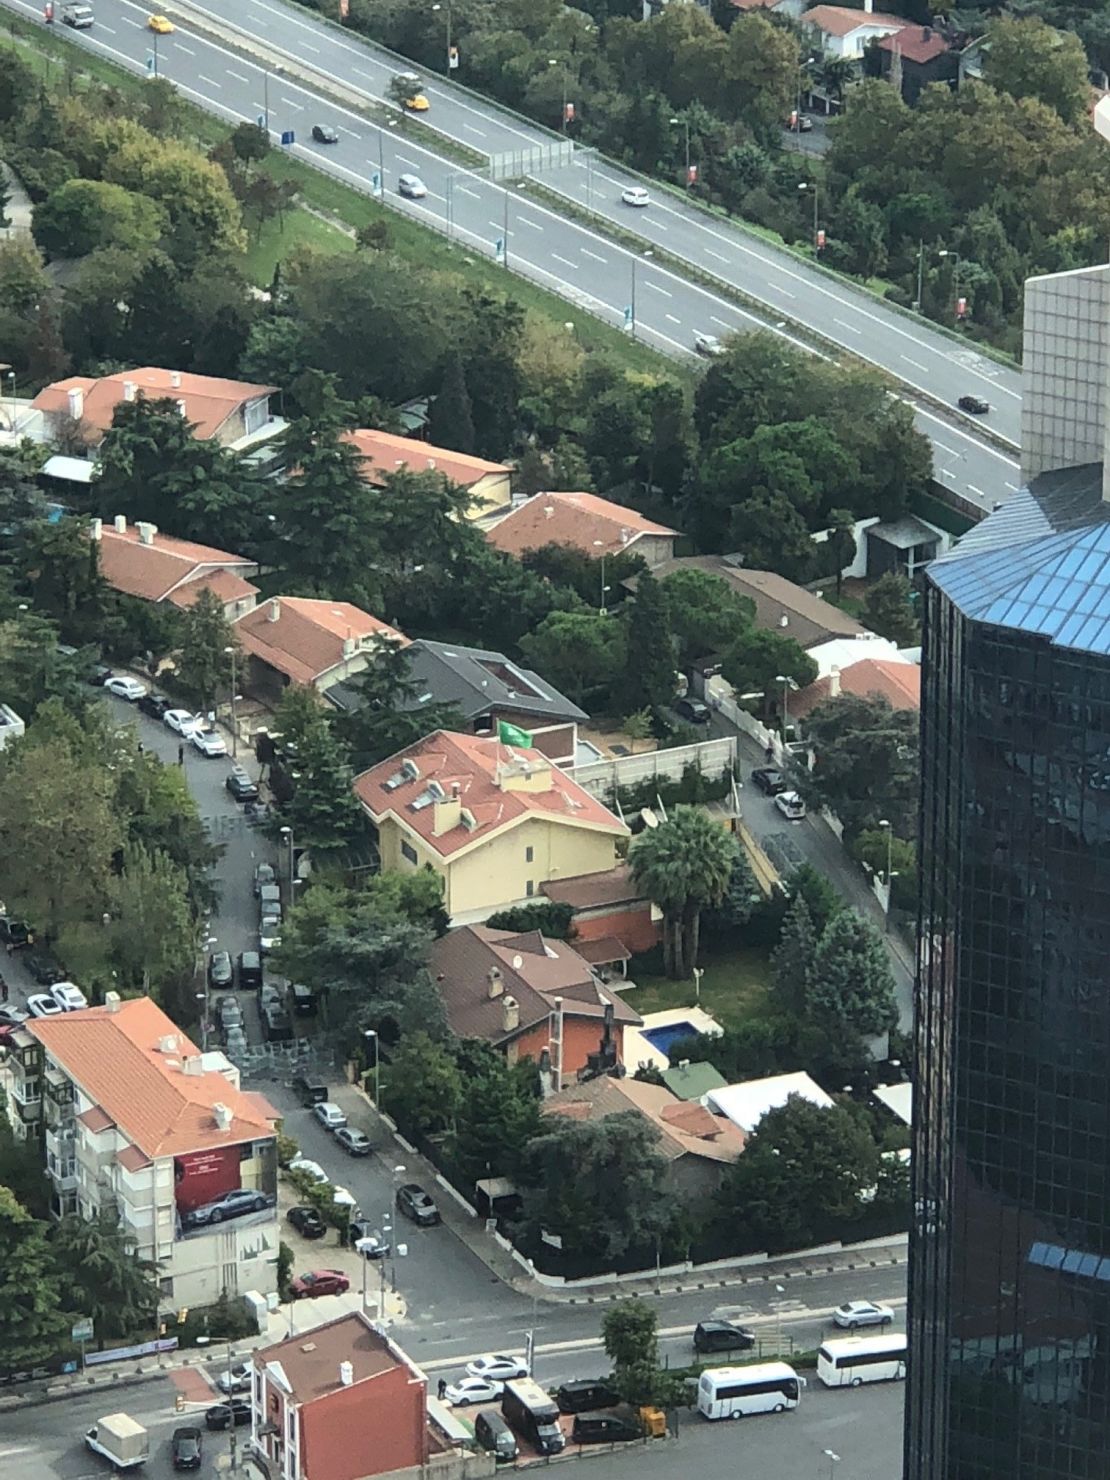 An aerial shot of the Saudi consulate in Istanbul on Oct 9th. The yellow, small building with flag is the consulate.